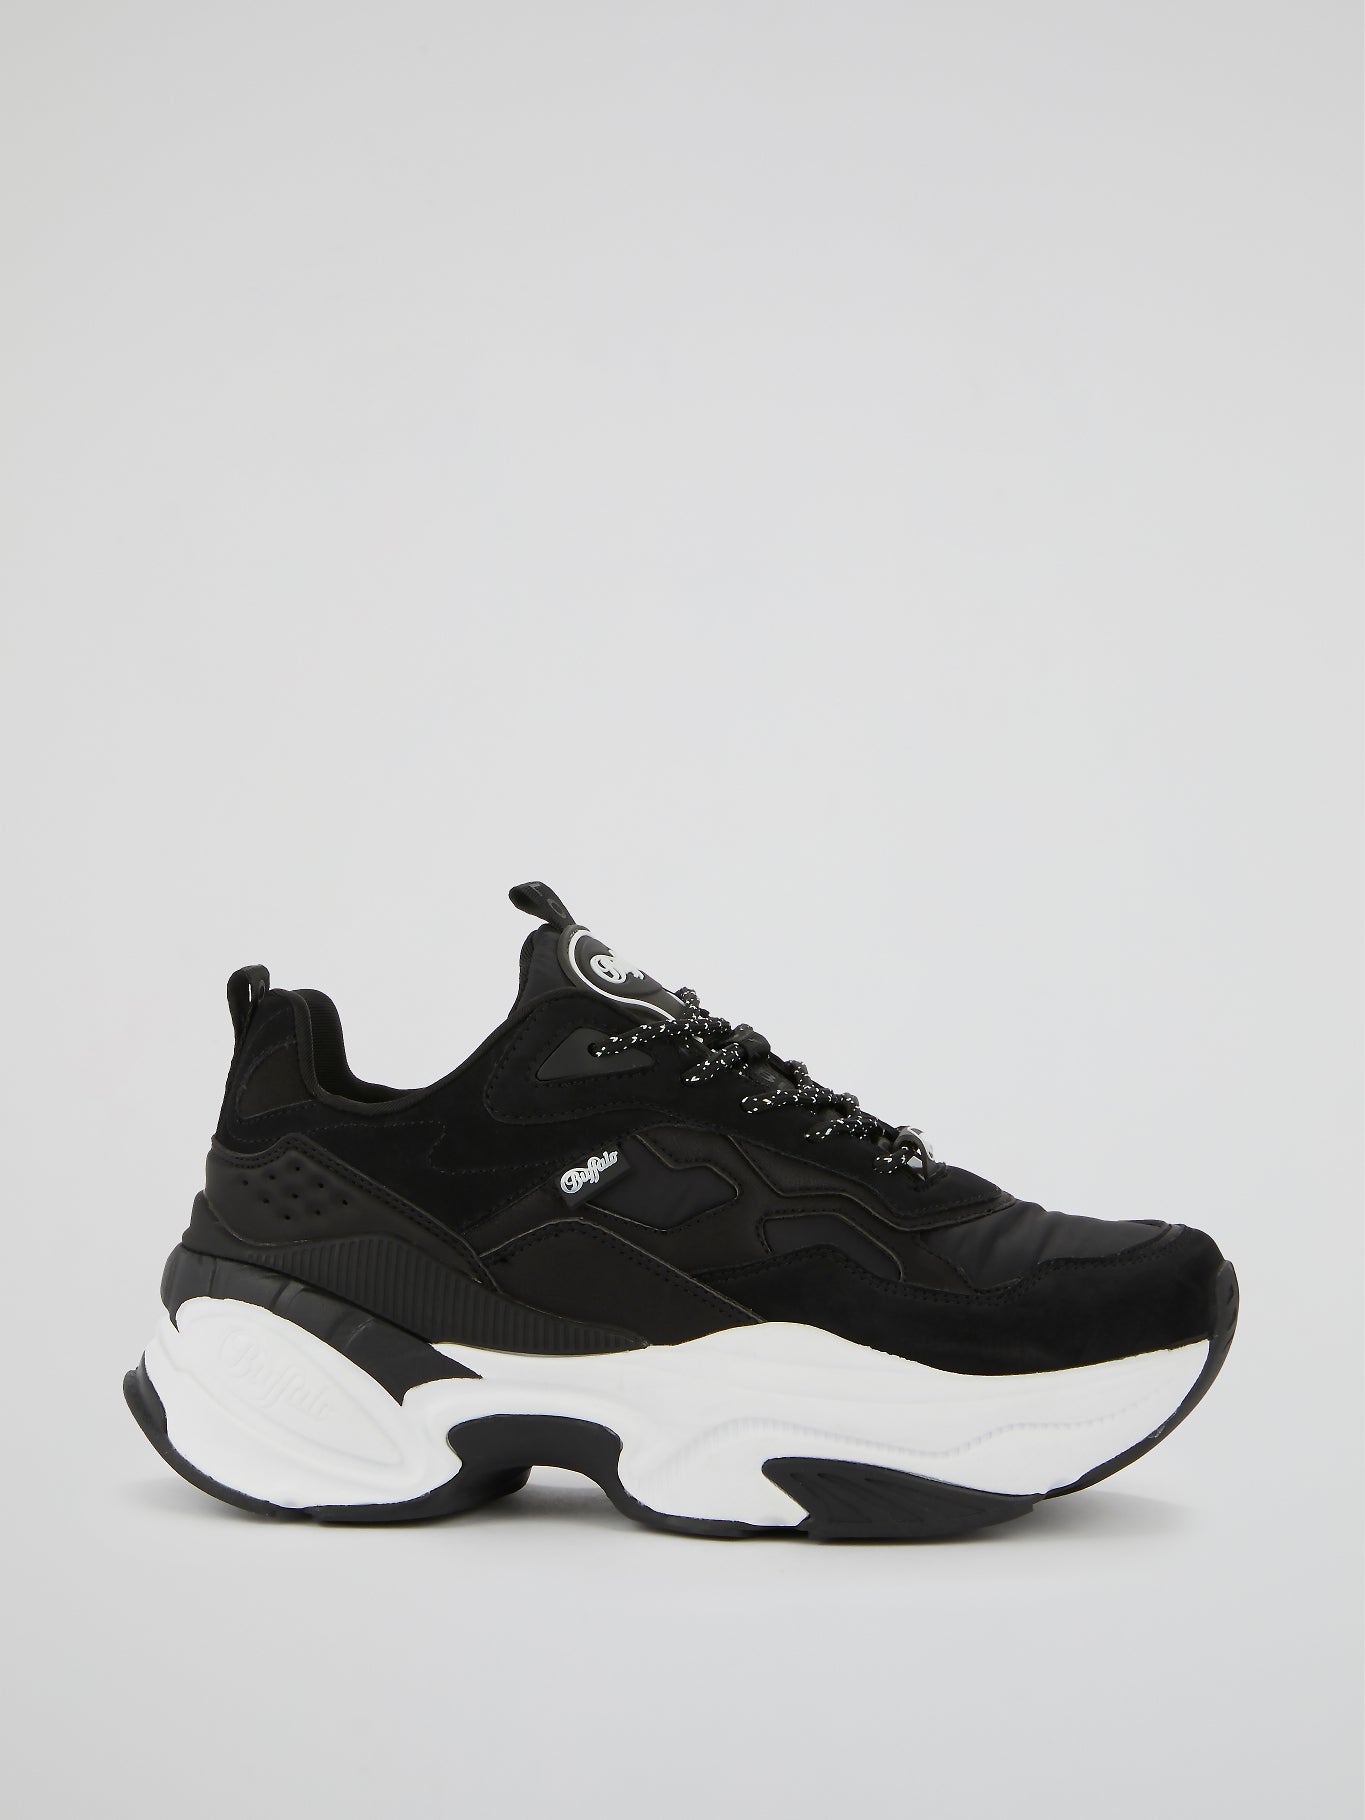 Crevis P1 Black Chunky Sole Sneakers